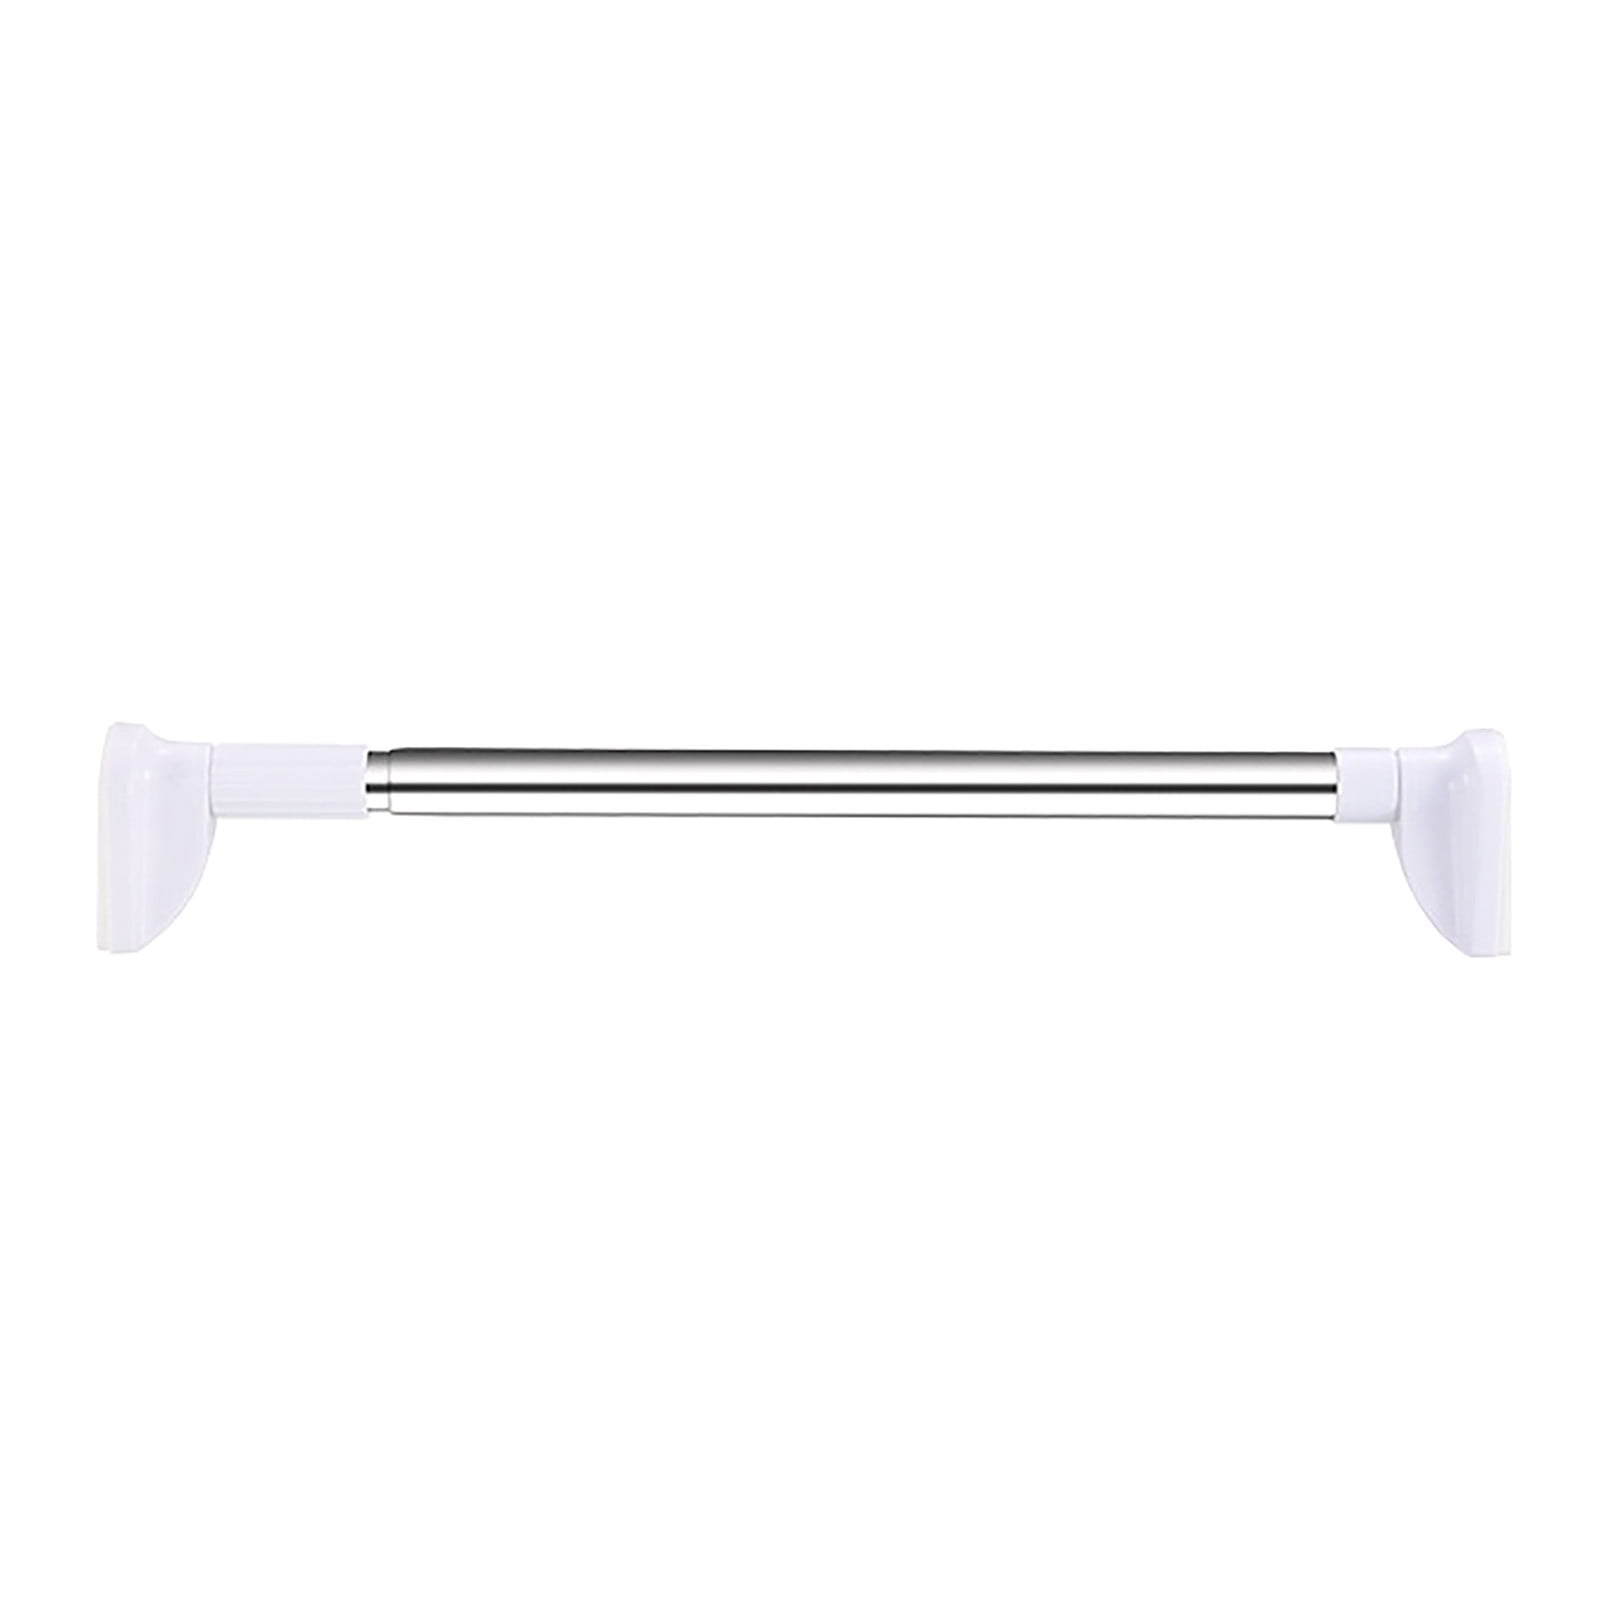 Punch Free Telescopic Curtain Tension Rods23-43 inches Spring Curtain Rod HOT 